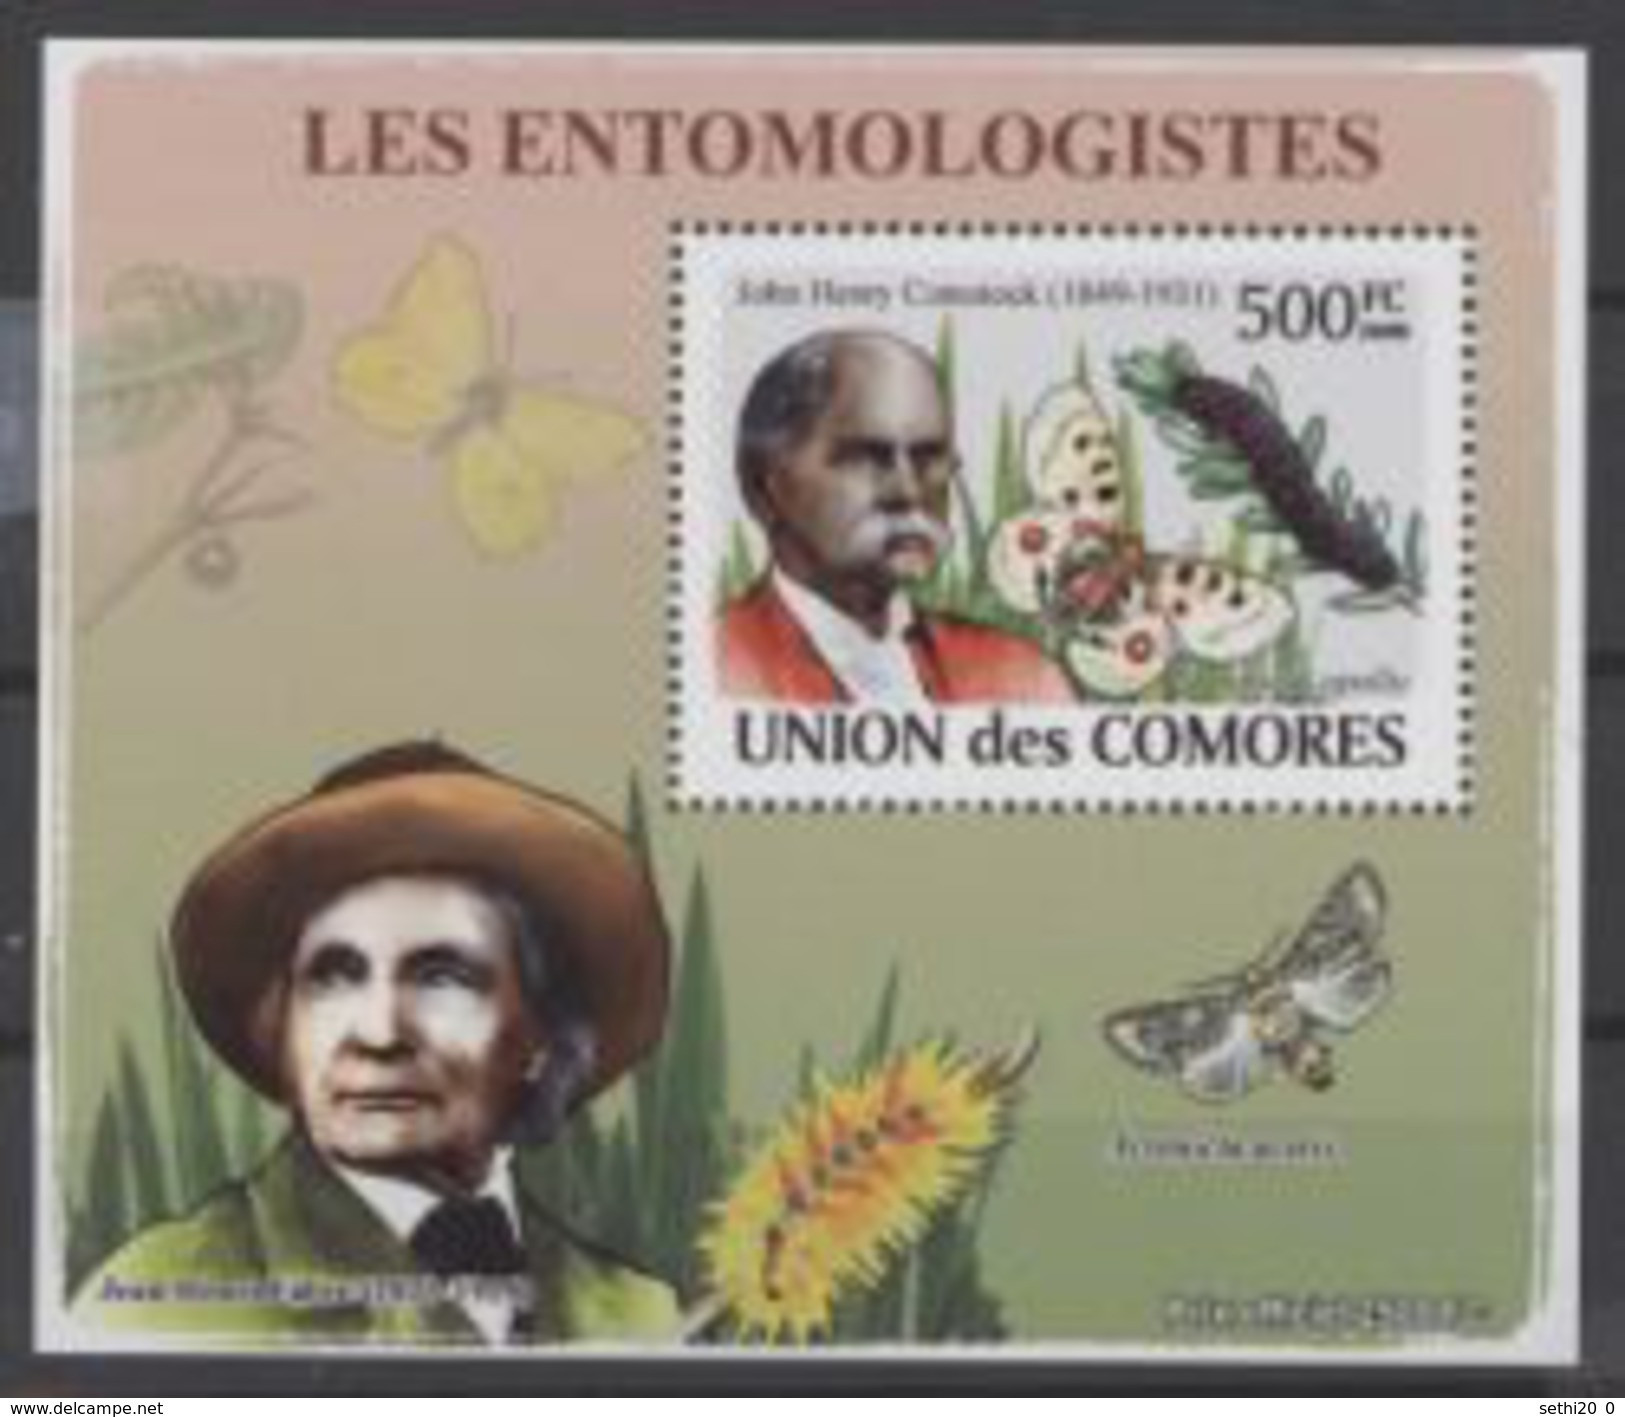 Comores John Henry COMSTOCK Jean Henri FABRE  On Margin Entomologists Butterfly Papillon  BF Luxe Perf - Vlinders